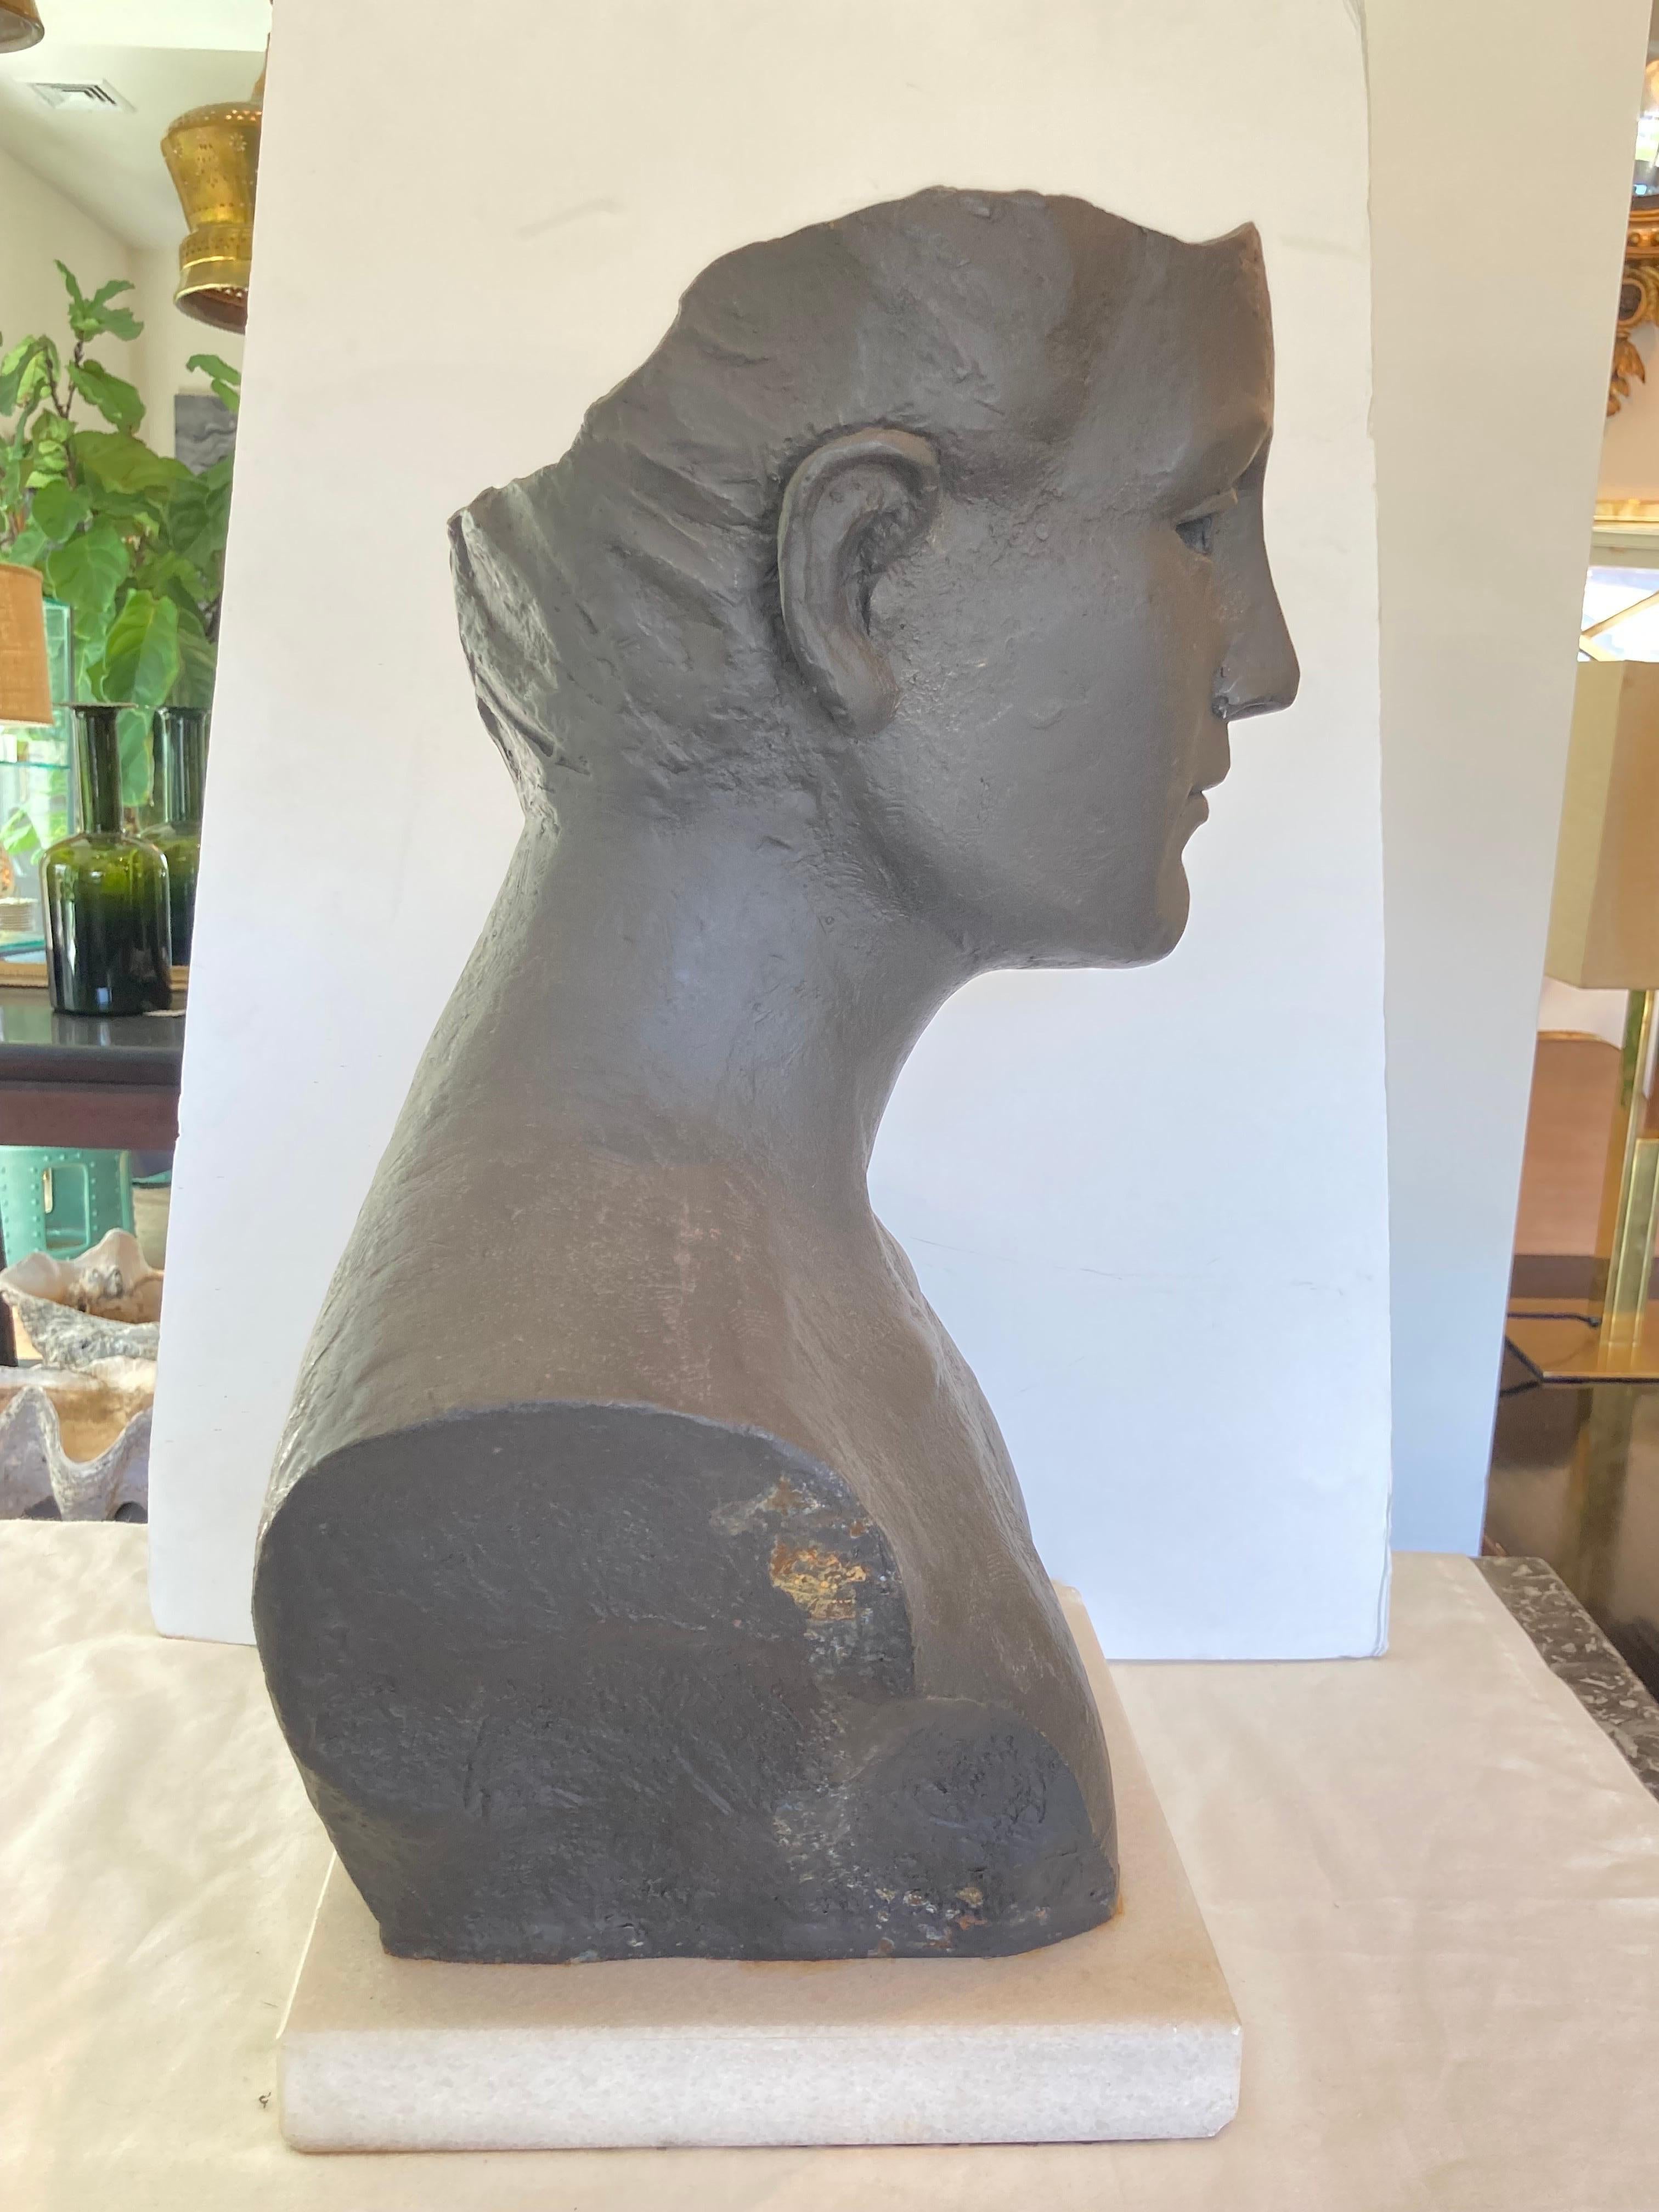 Iron bust sculpture of a man, mounted on stone base... not signed, artist unknown...
Base measures: 10.25